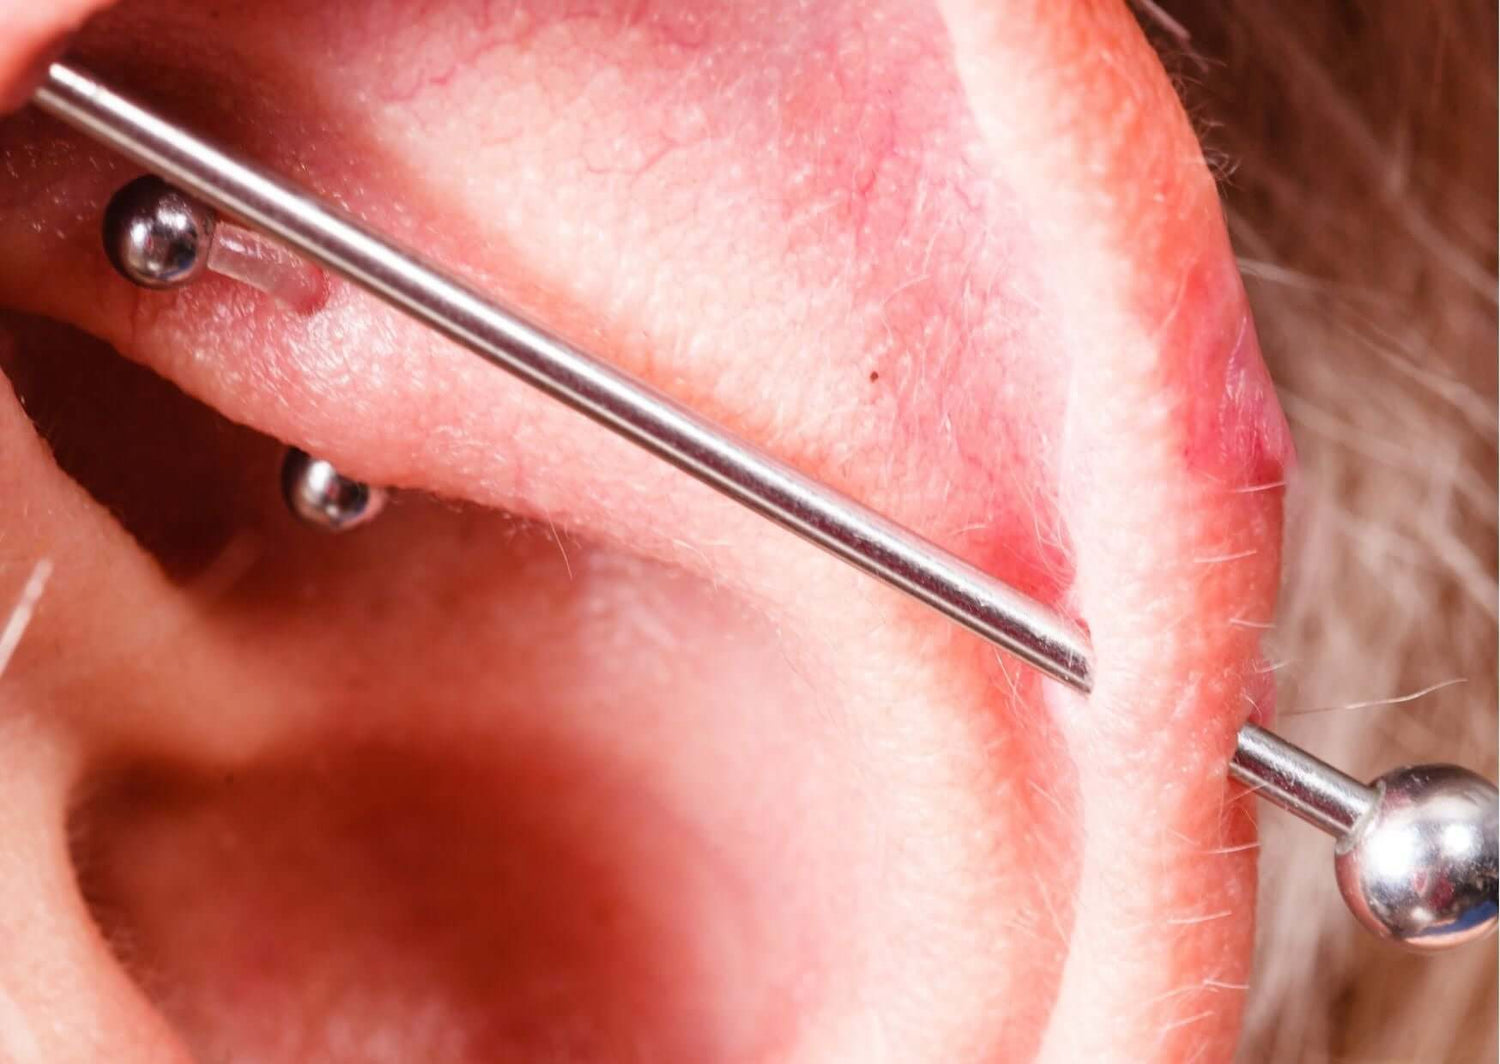 Is Your Industrial Piercing Infected? What to Do About It - Dr. Piercing Aftercare